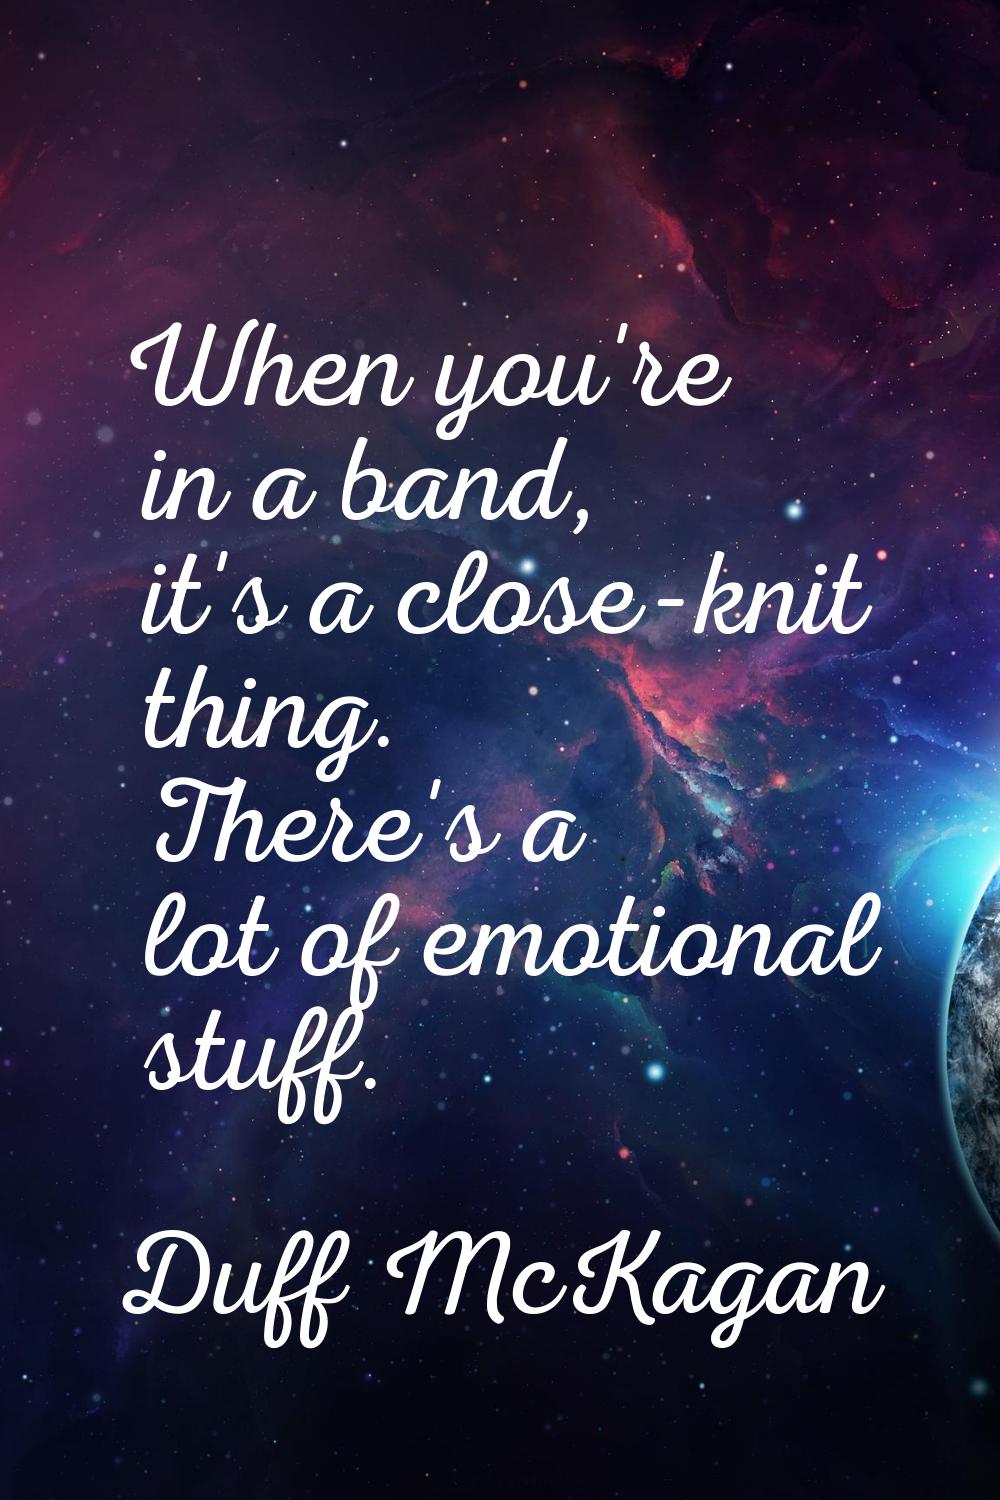 When you're in a band, it's a close-knit thing. There's a lot of emotional stuff.